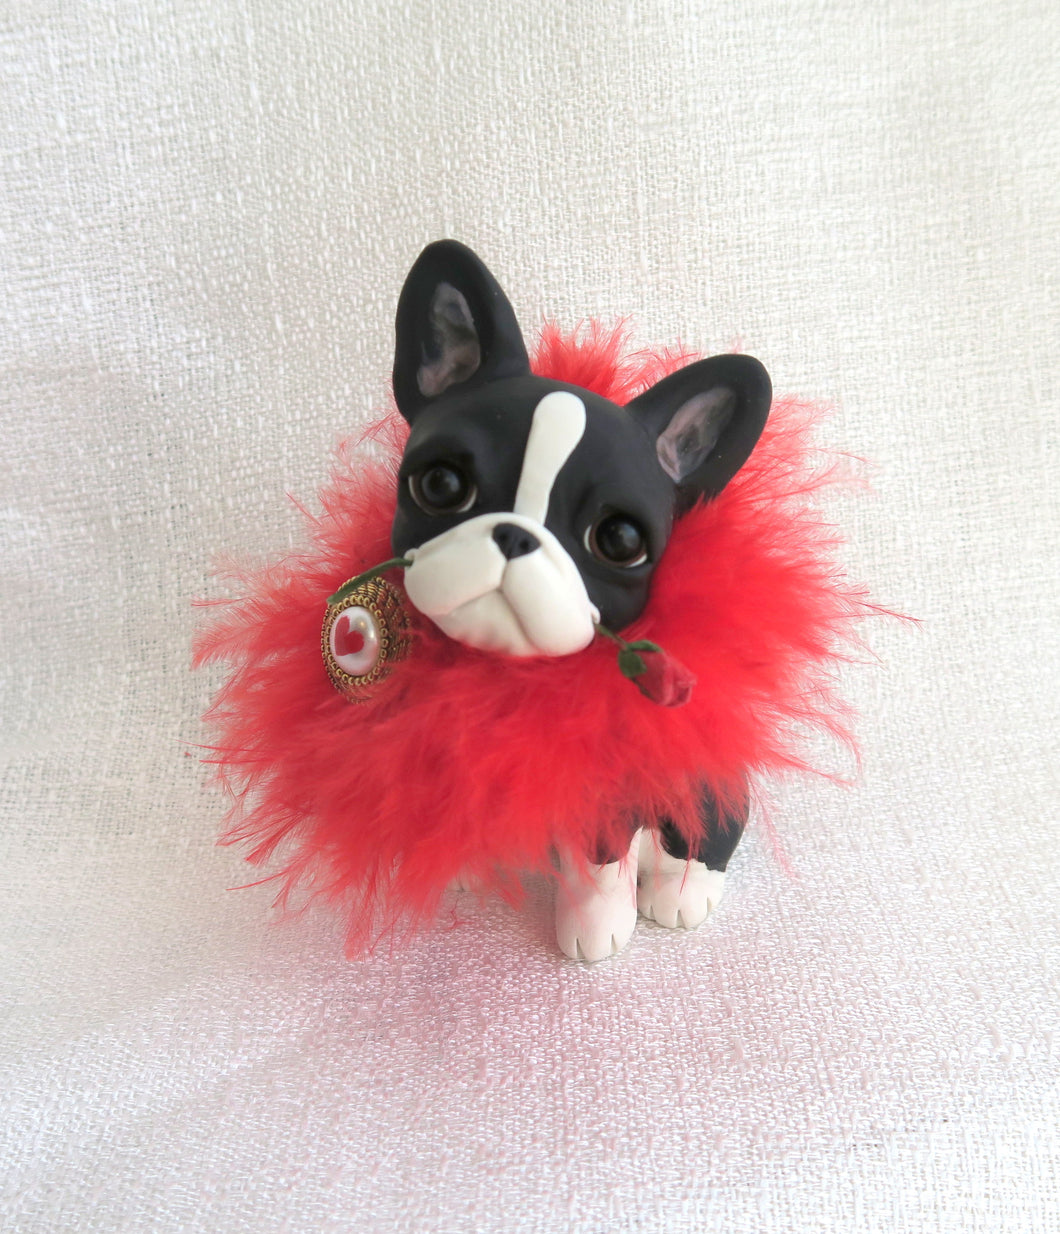 Boston Terrier Valentine's Day hand sculpted Collectible